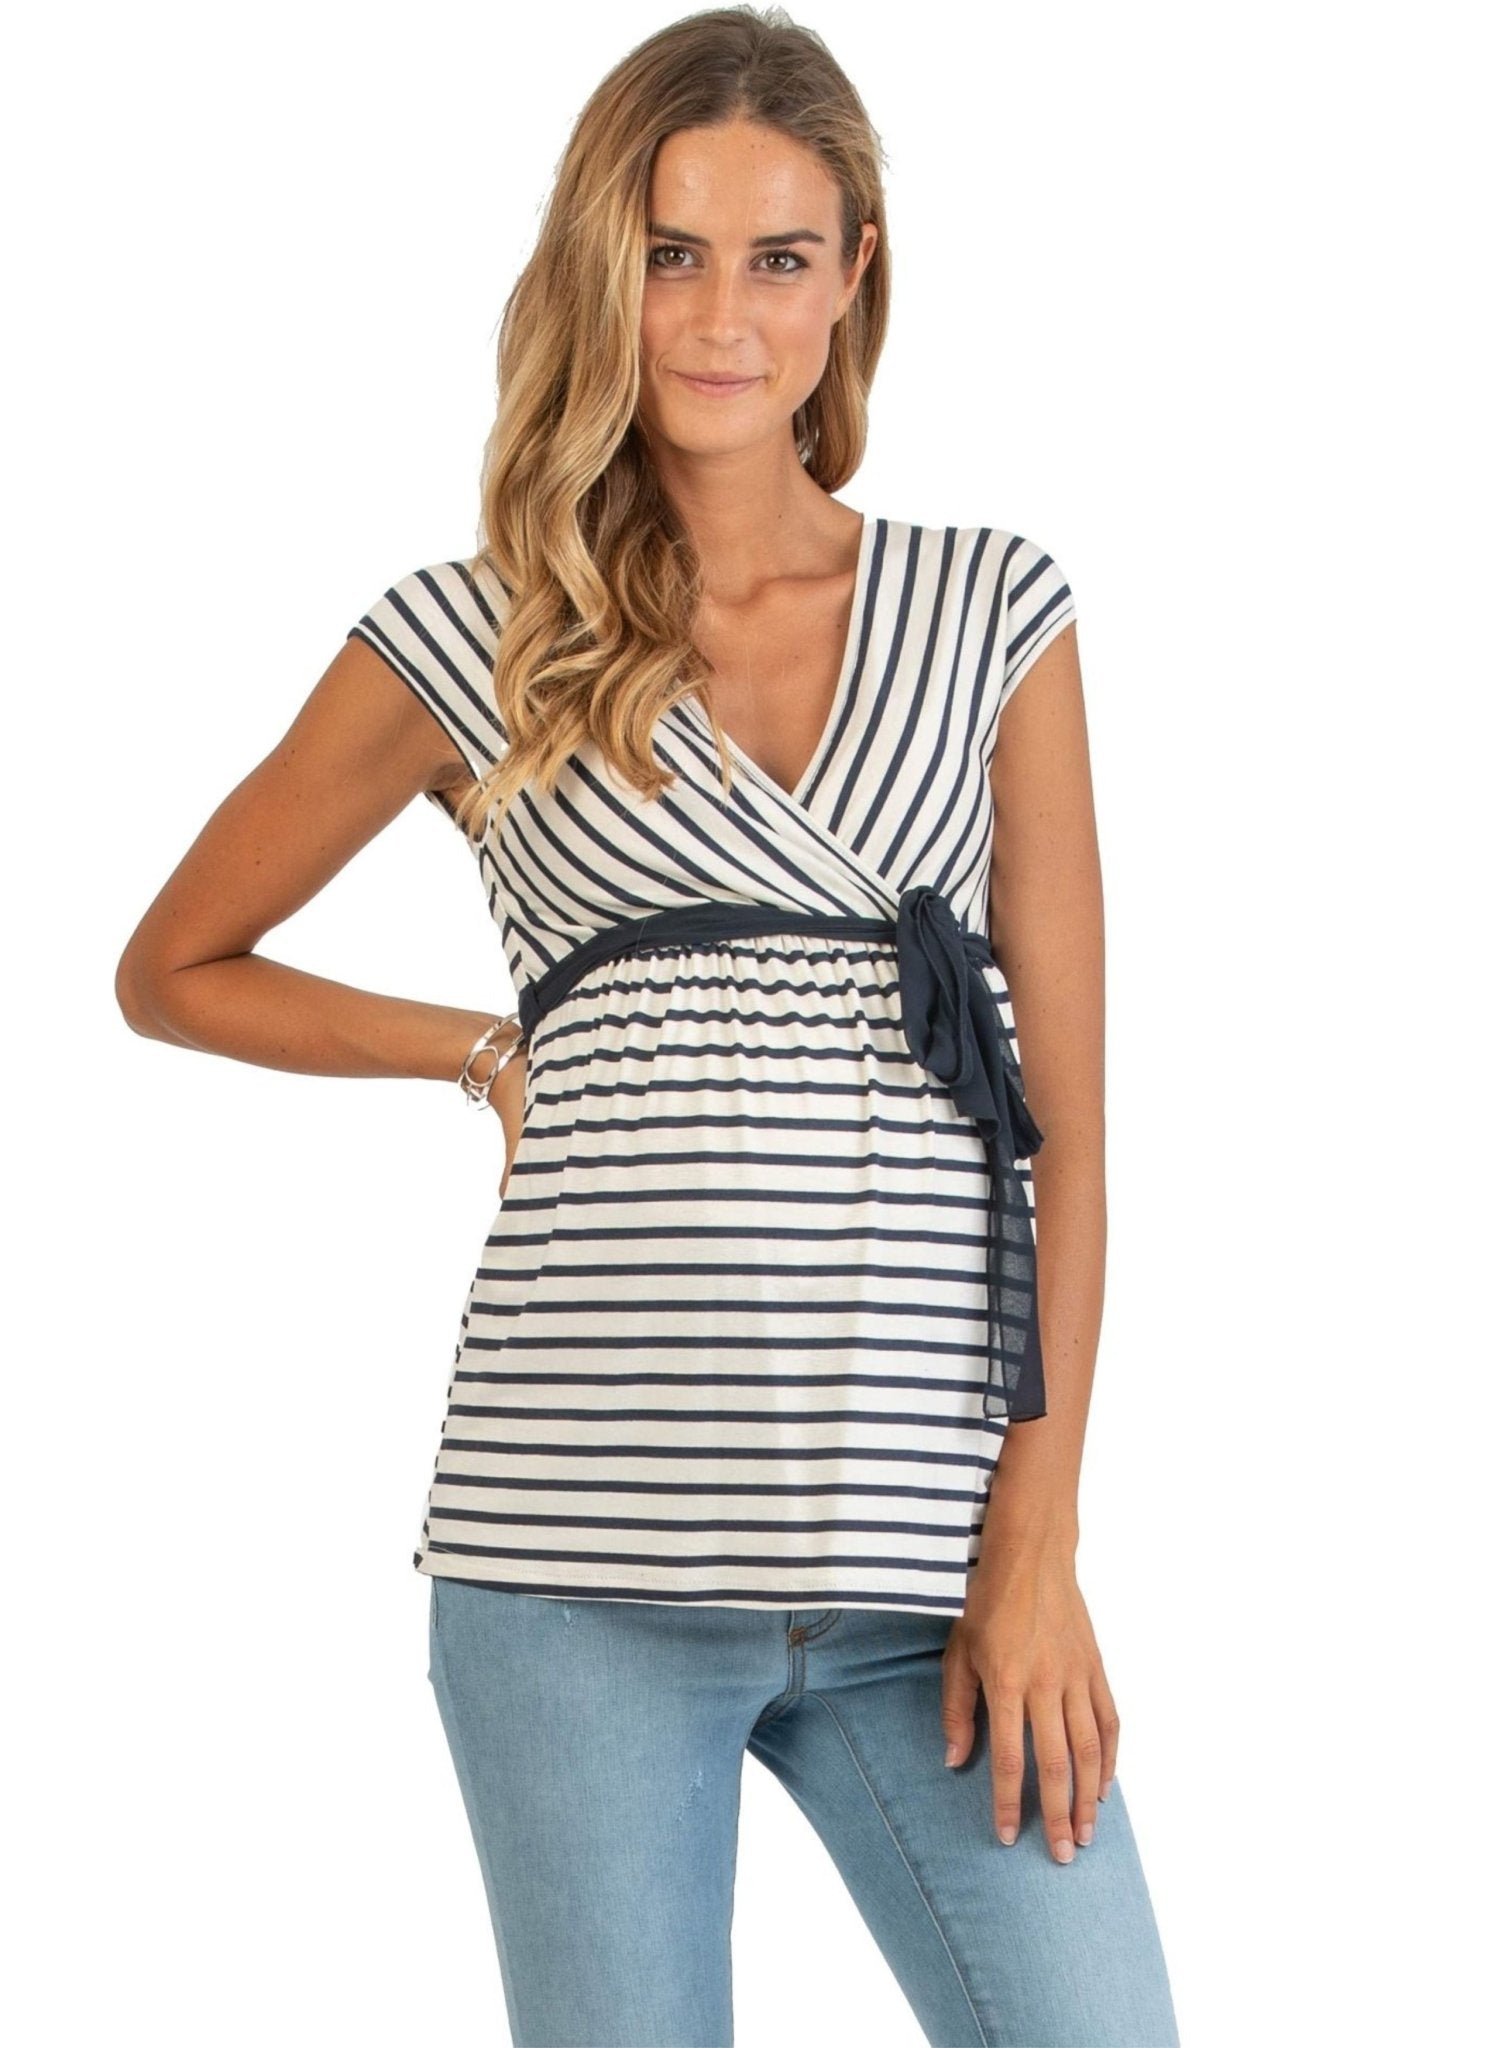 Wrap Maternity & Nursing Top with Belt - Mums and Bumps